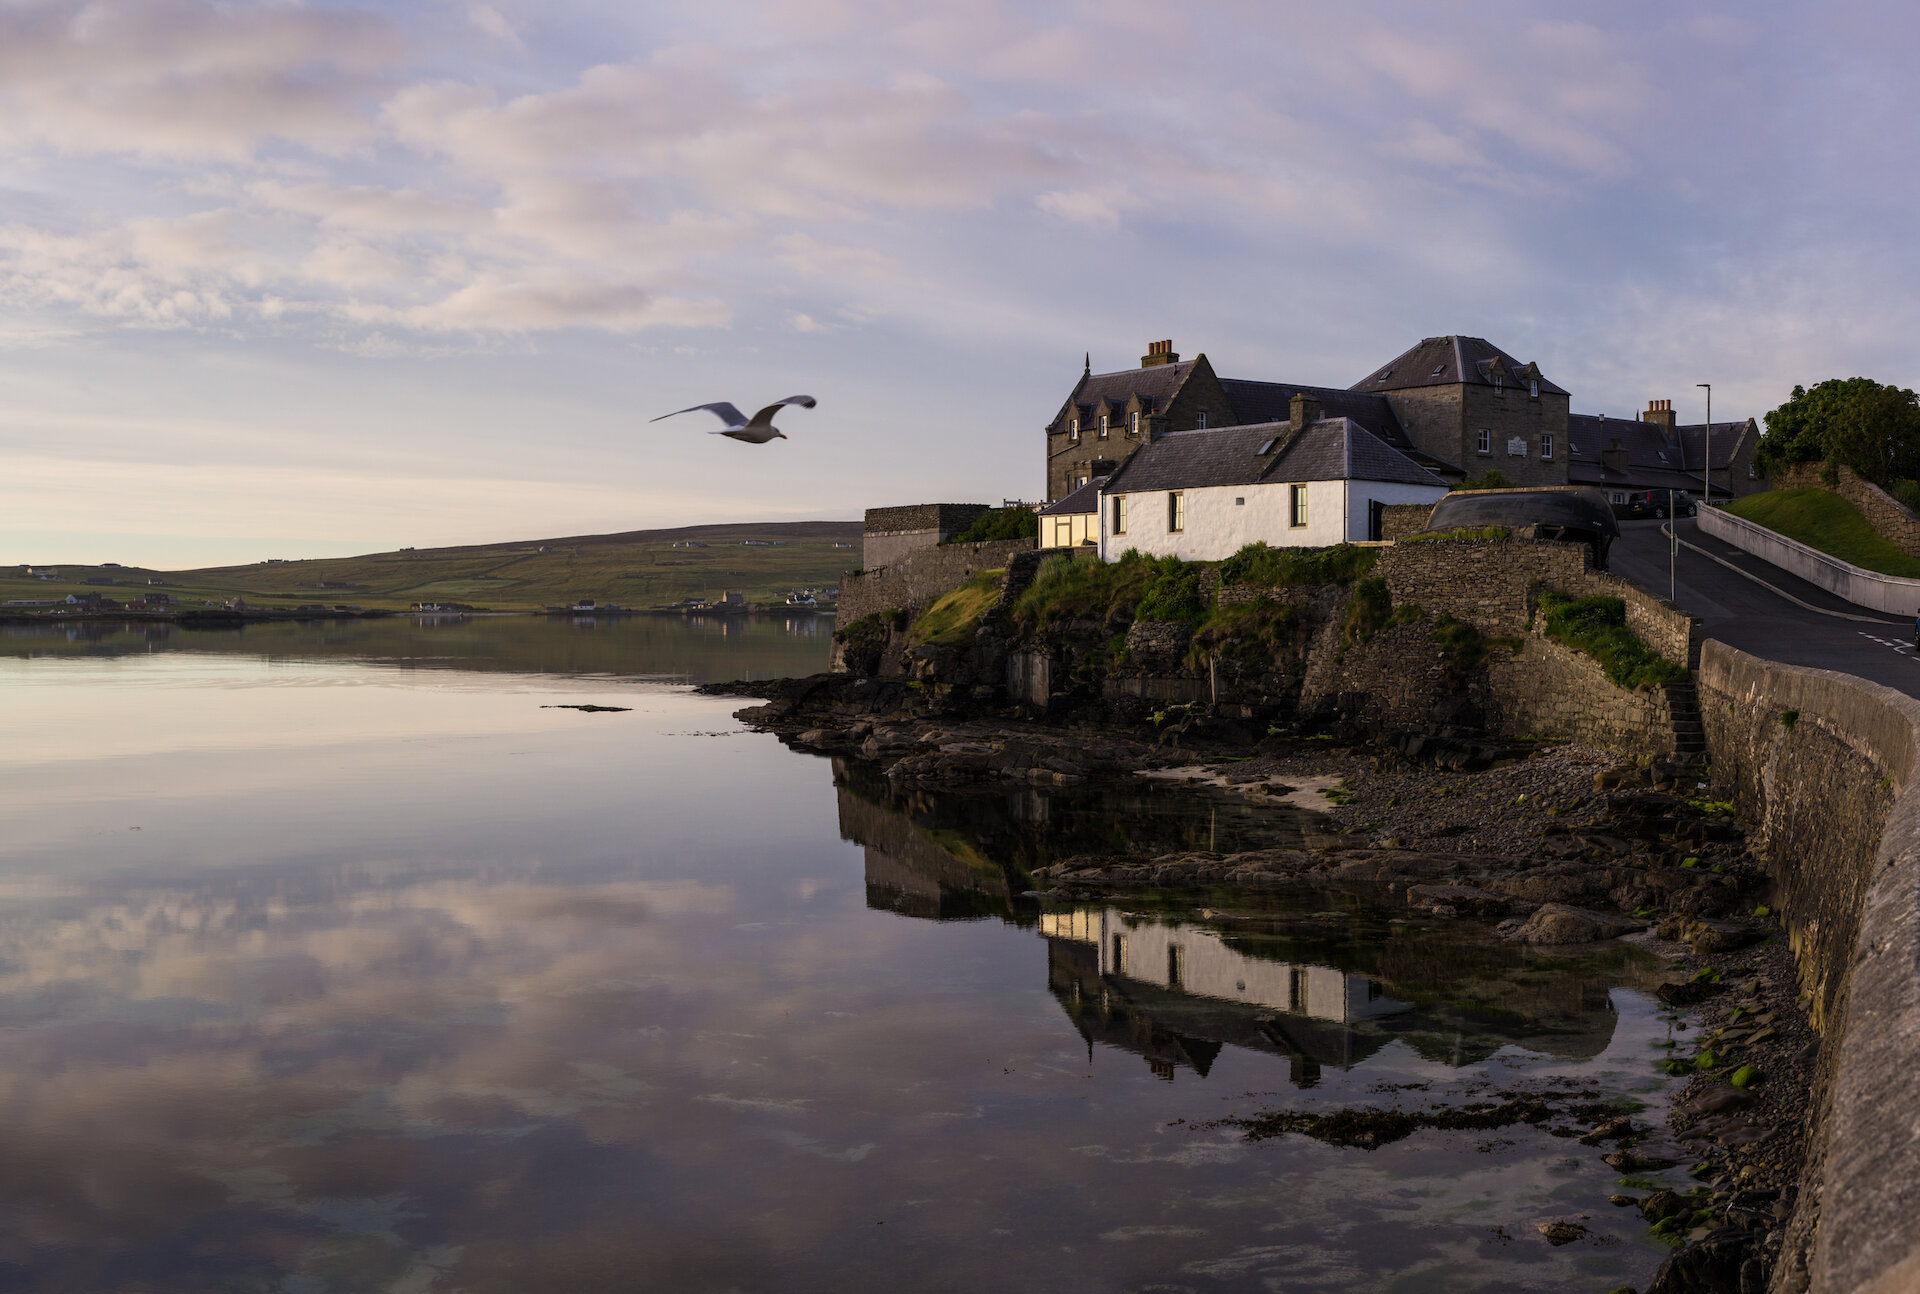 Many homes in Shetland are by the sea